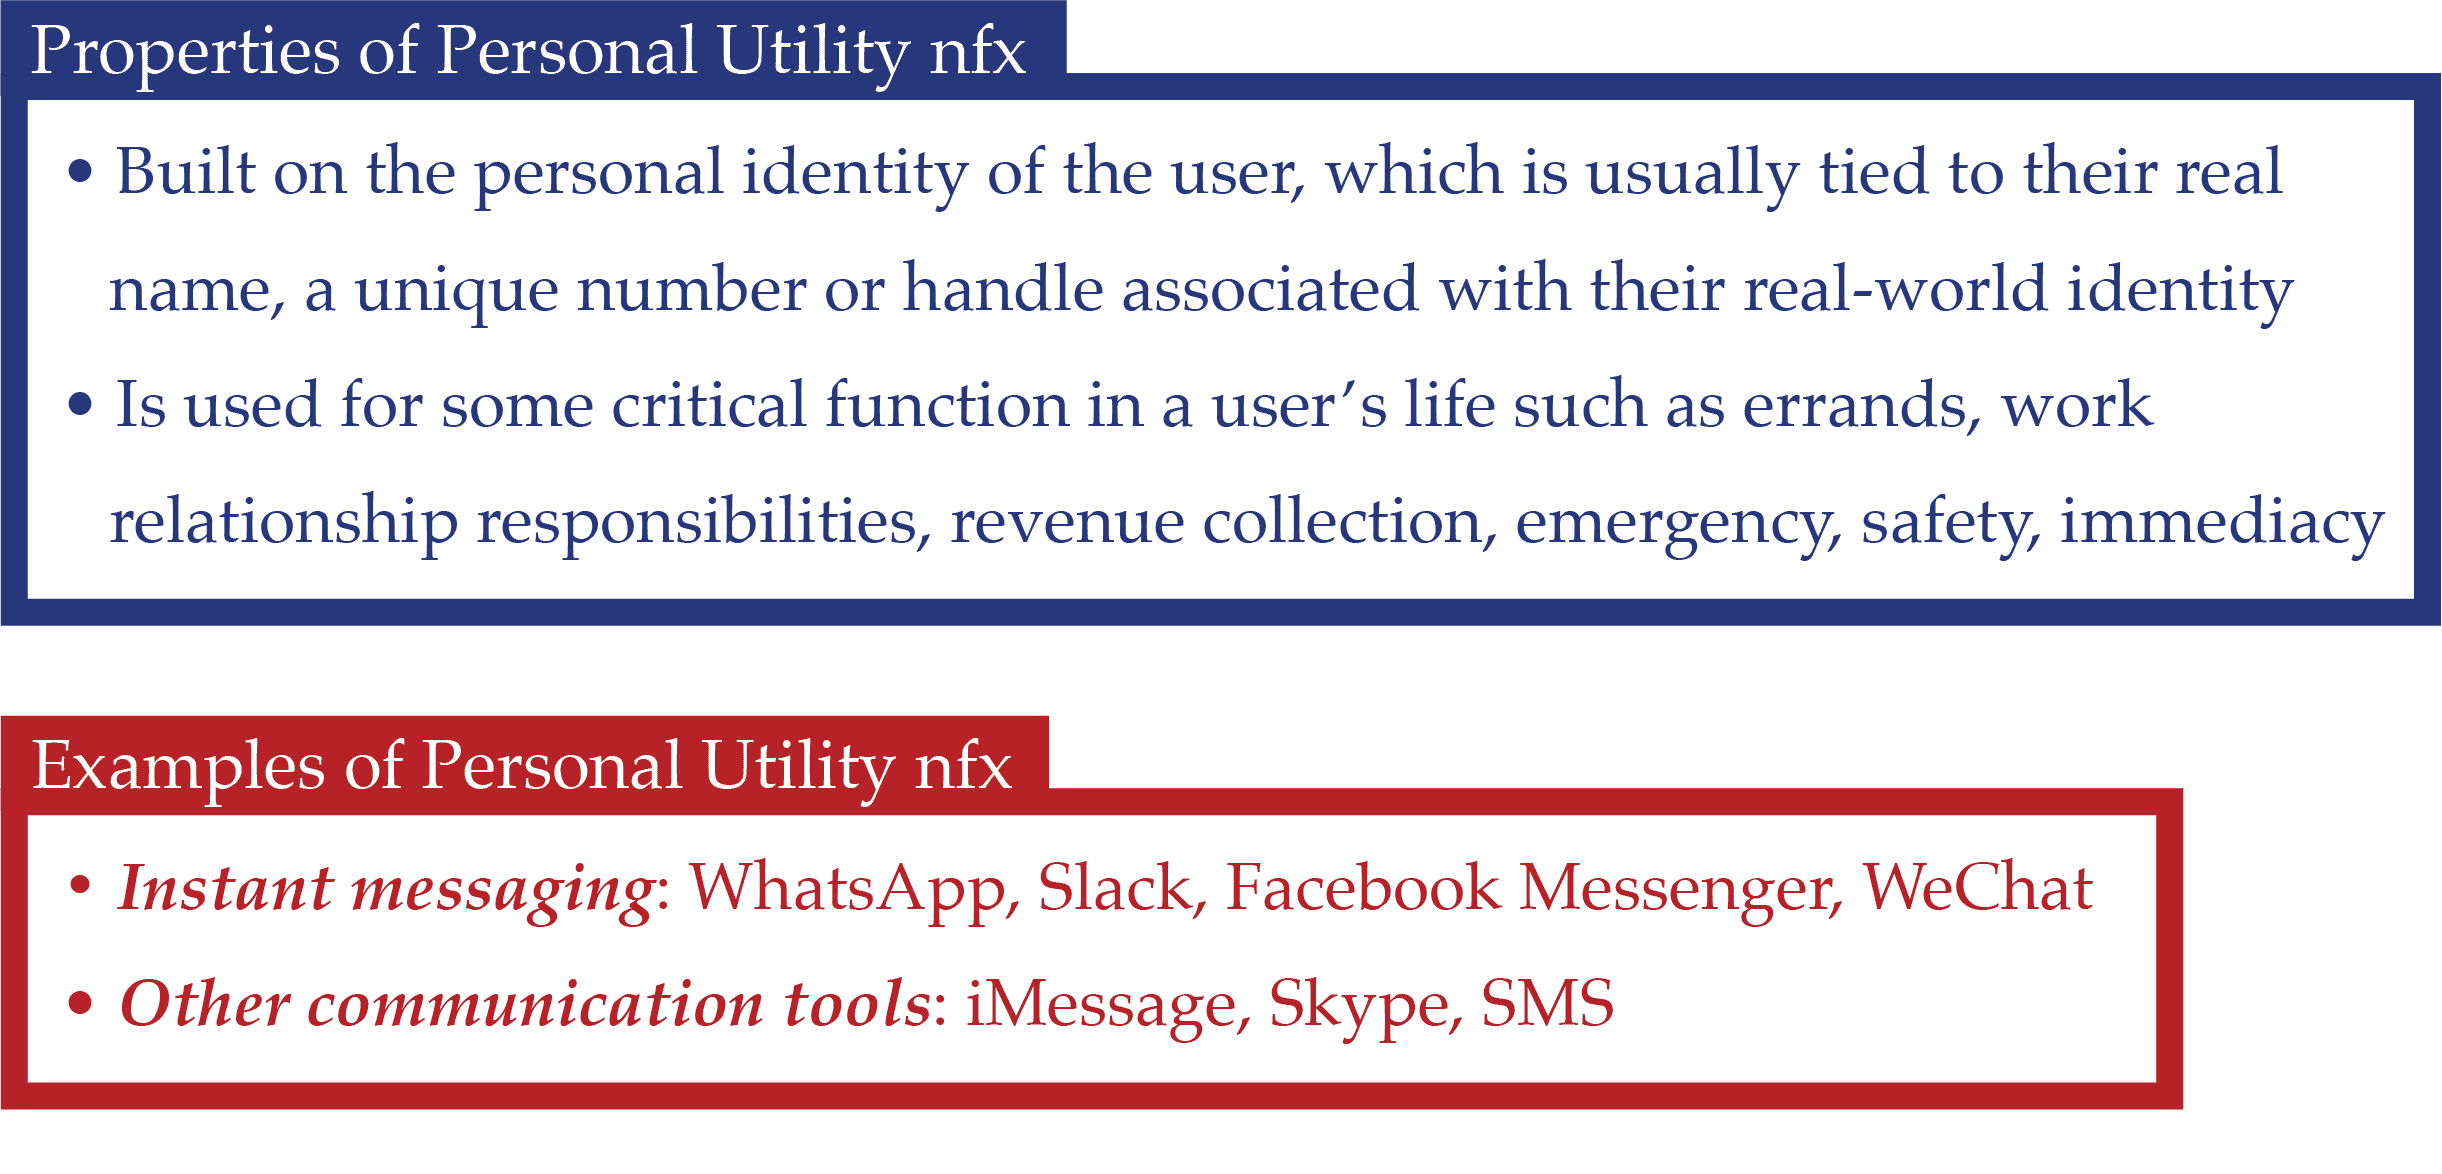 Properties and Example of Personal Utility NFX